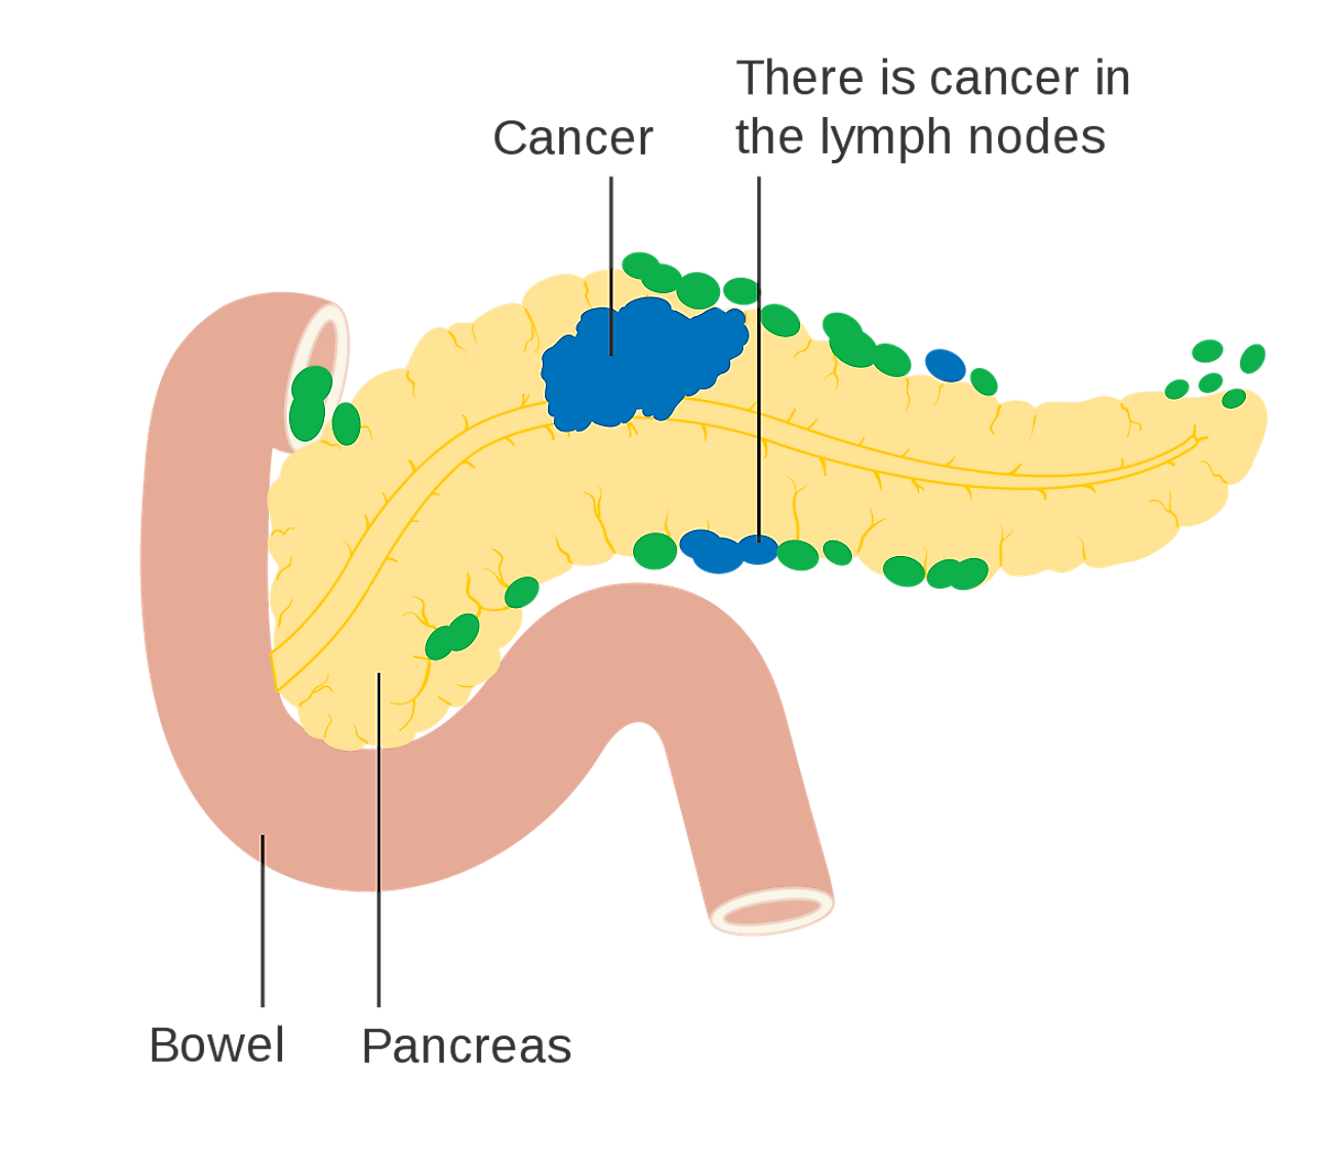 Diagram showing pancreatic cancer in the lymph nodes. Image credit: Cancer Research UK/Wikimedia.org